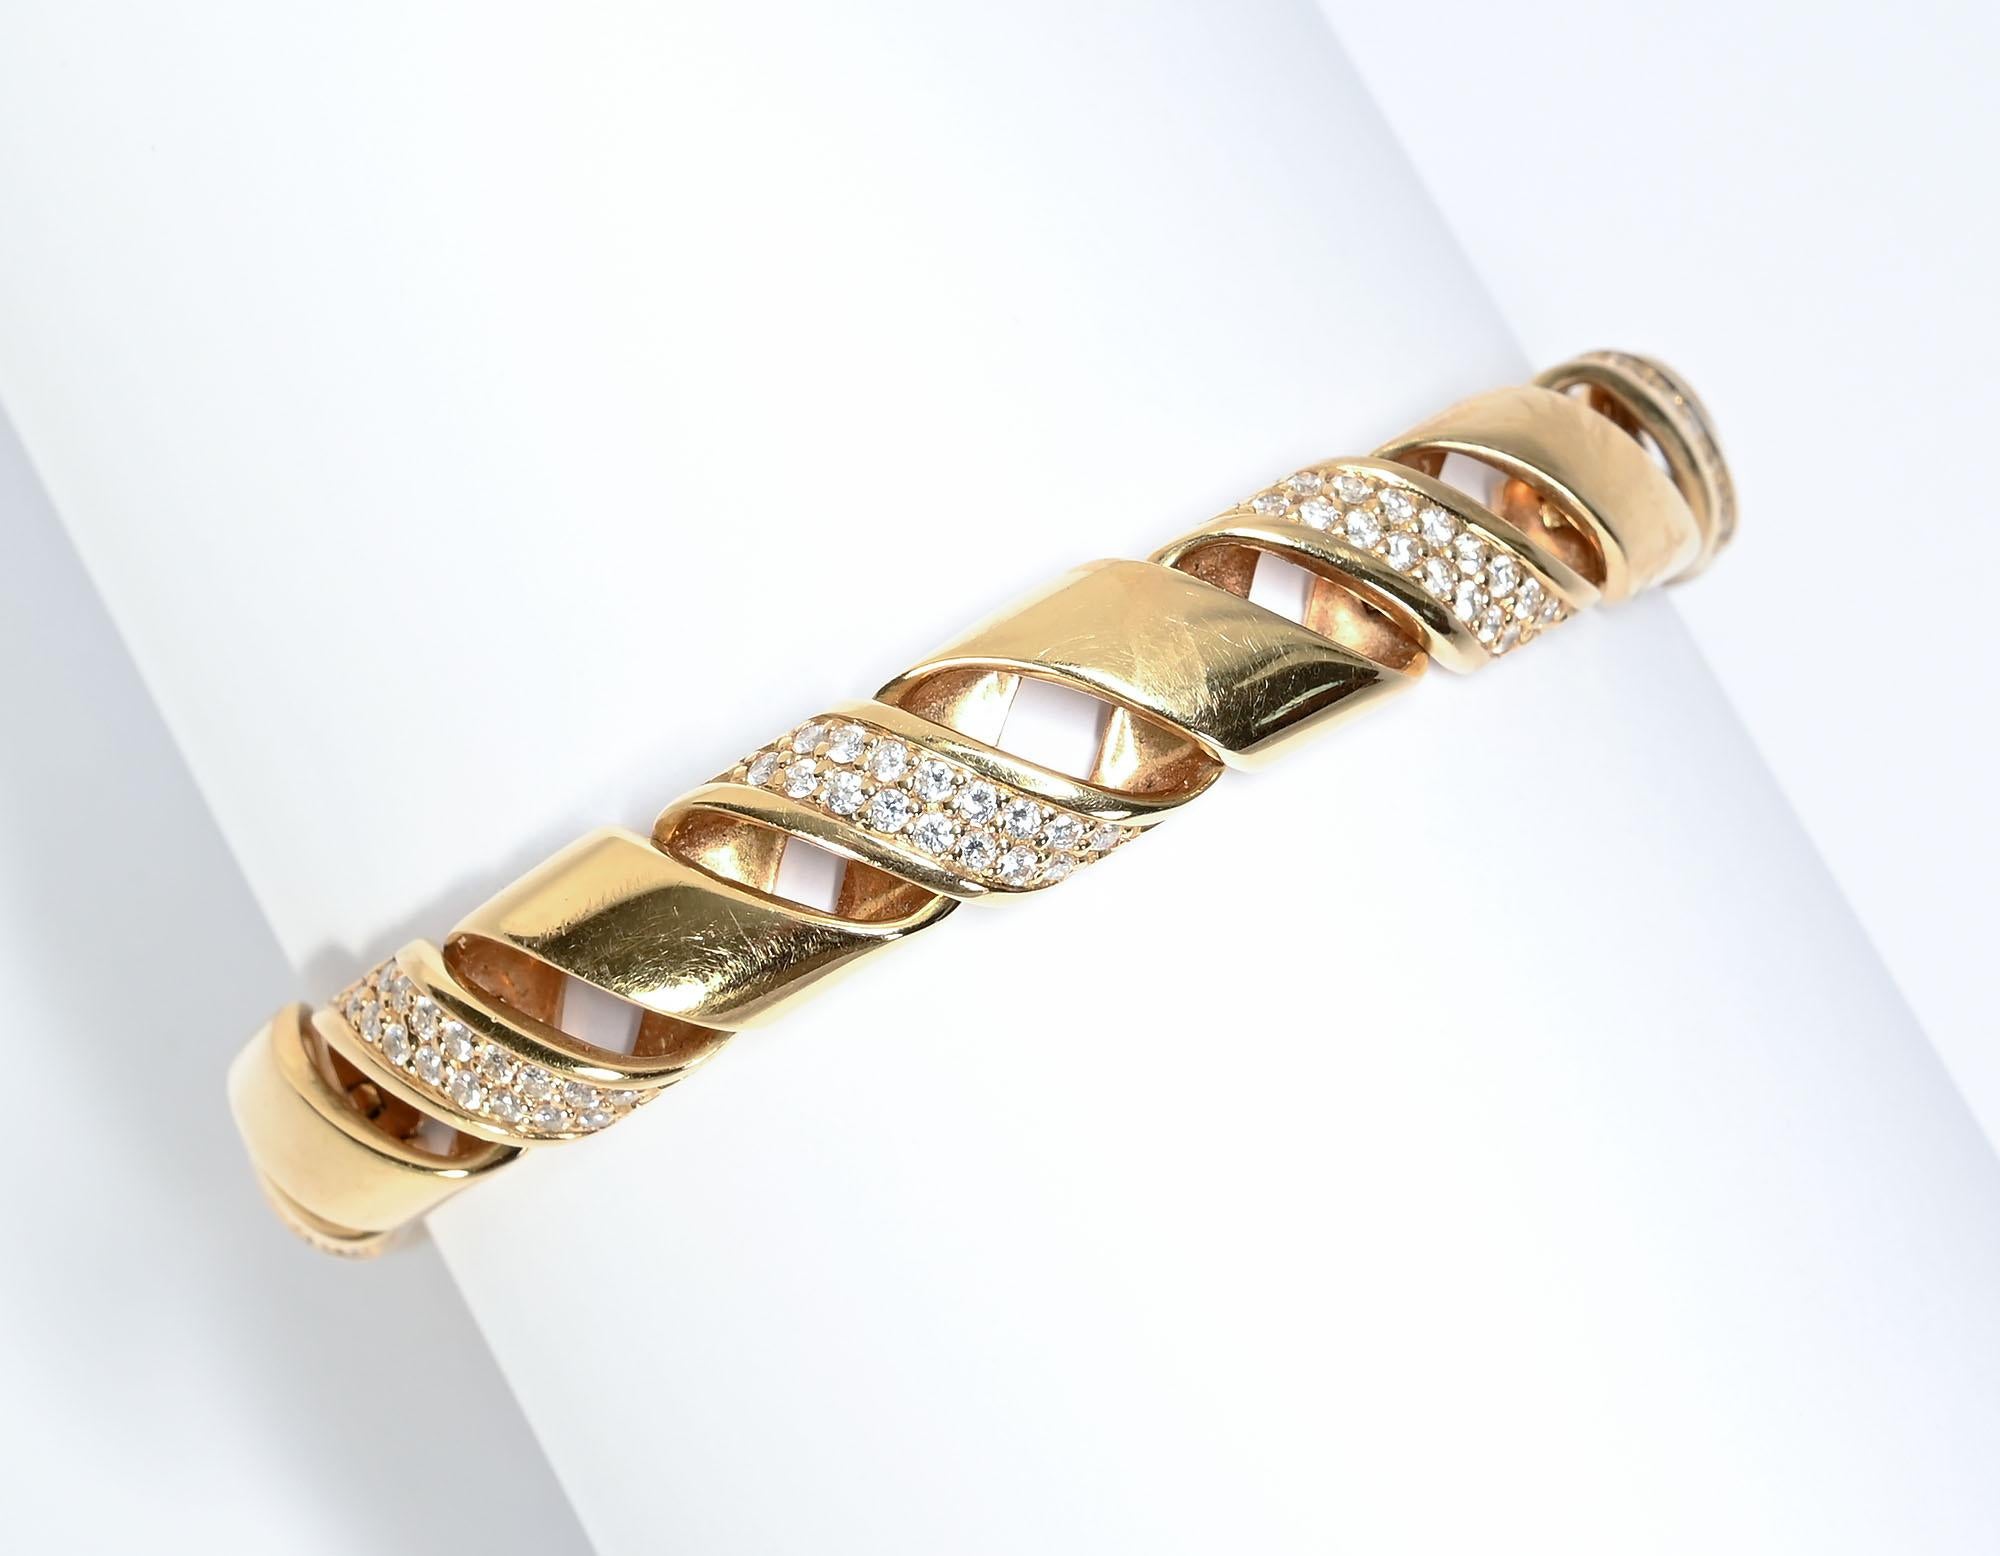 Beautifully made 18 karat gold bracelet of diagonal links alternating with the same shape with diamonds. The fabrication of the bracelet makes it flexible and very comfortable to wear. It has 144 diamonds with a total weight of 3 carats. The